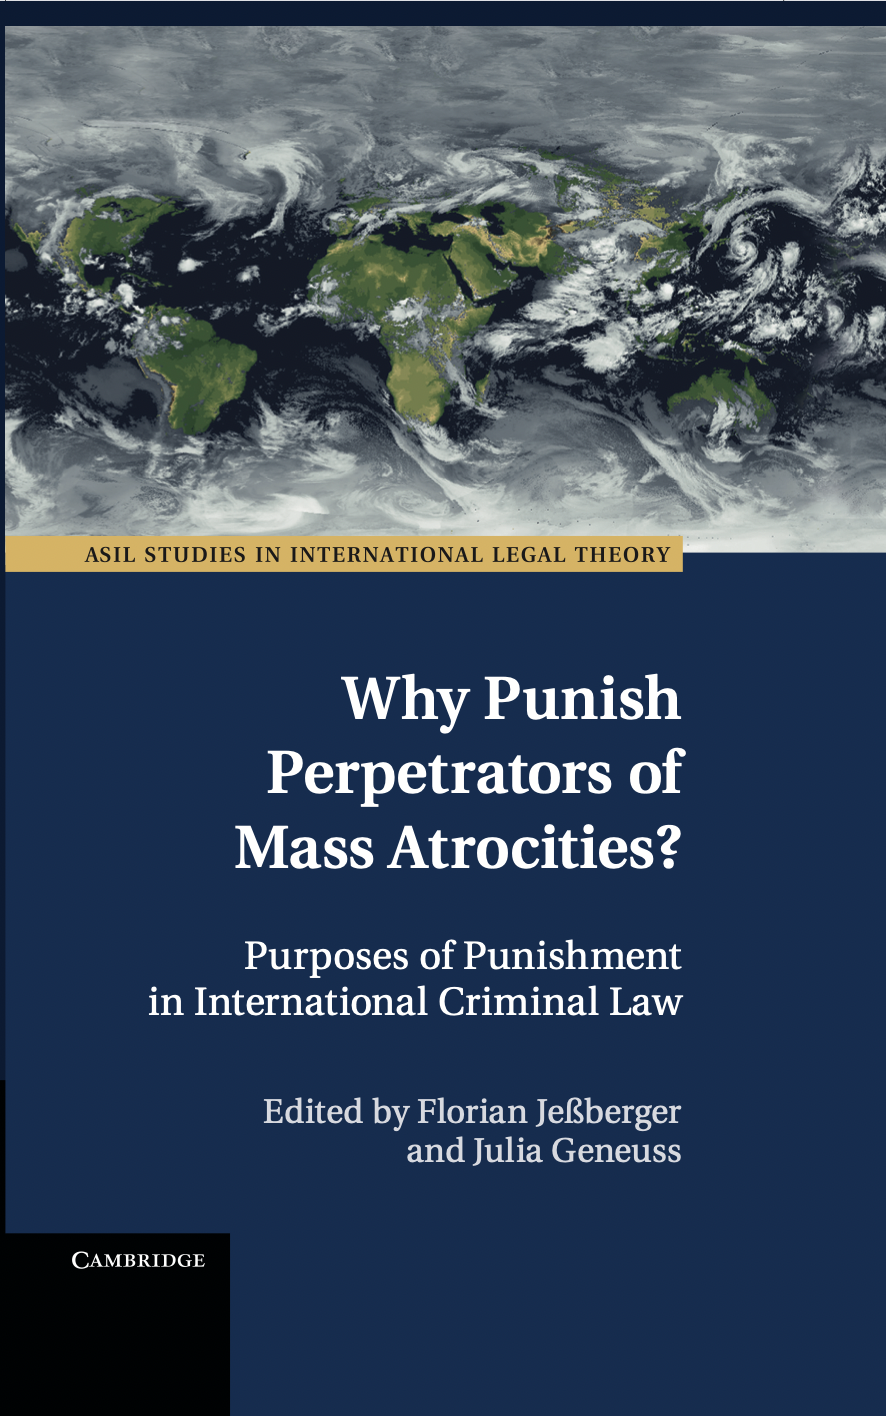 Why Punish Perpetrators of Mass Atrocities?, Theories of Punishment in International Criminal Law